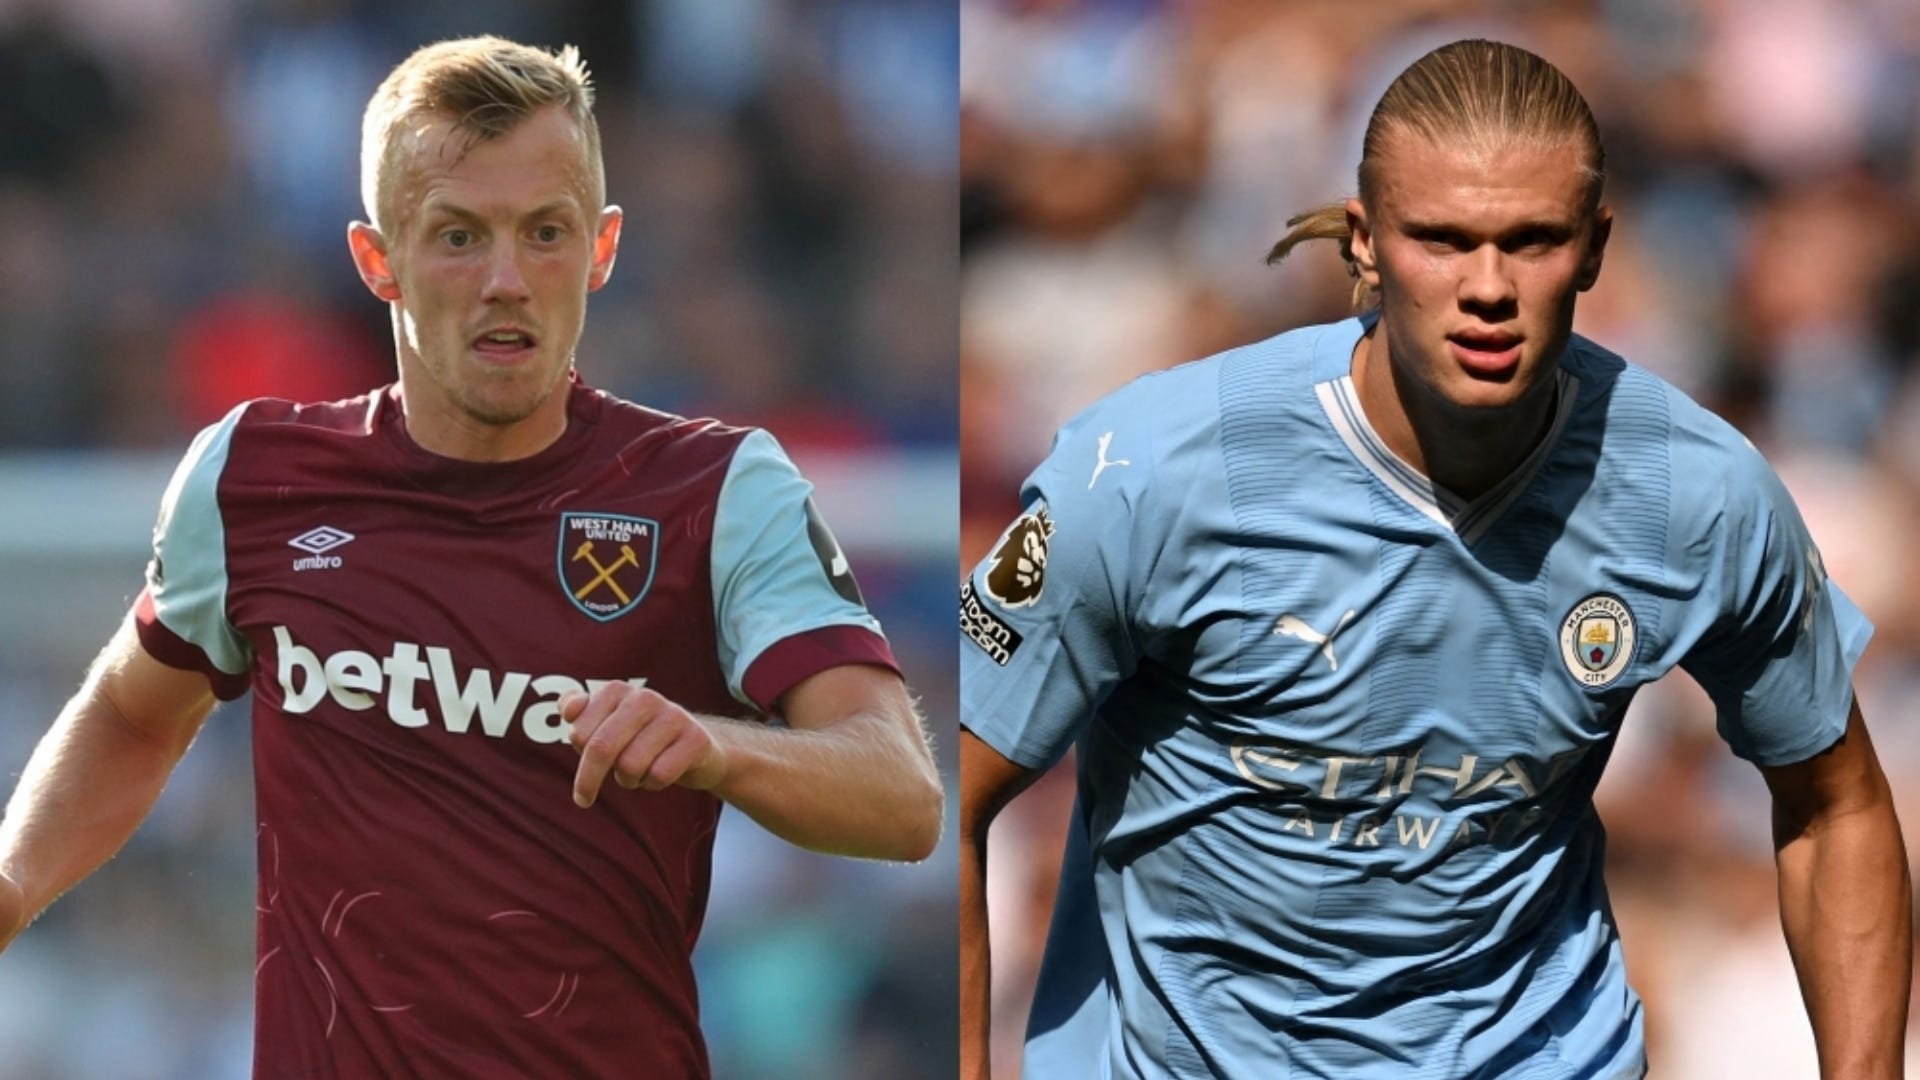 West Ham vs Man City Where to watch the match online, live stream, TV channels, and kick-off time Goal US